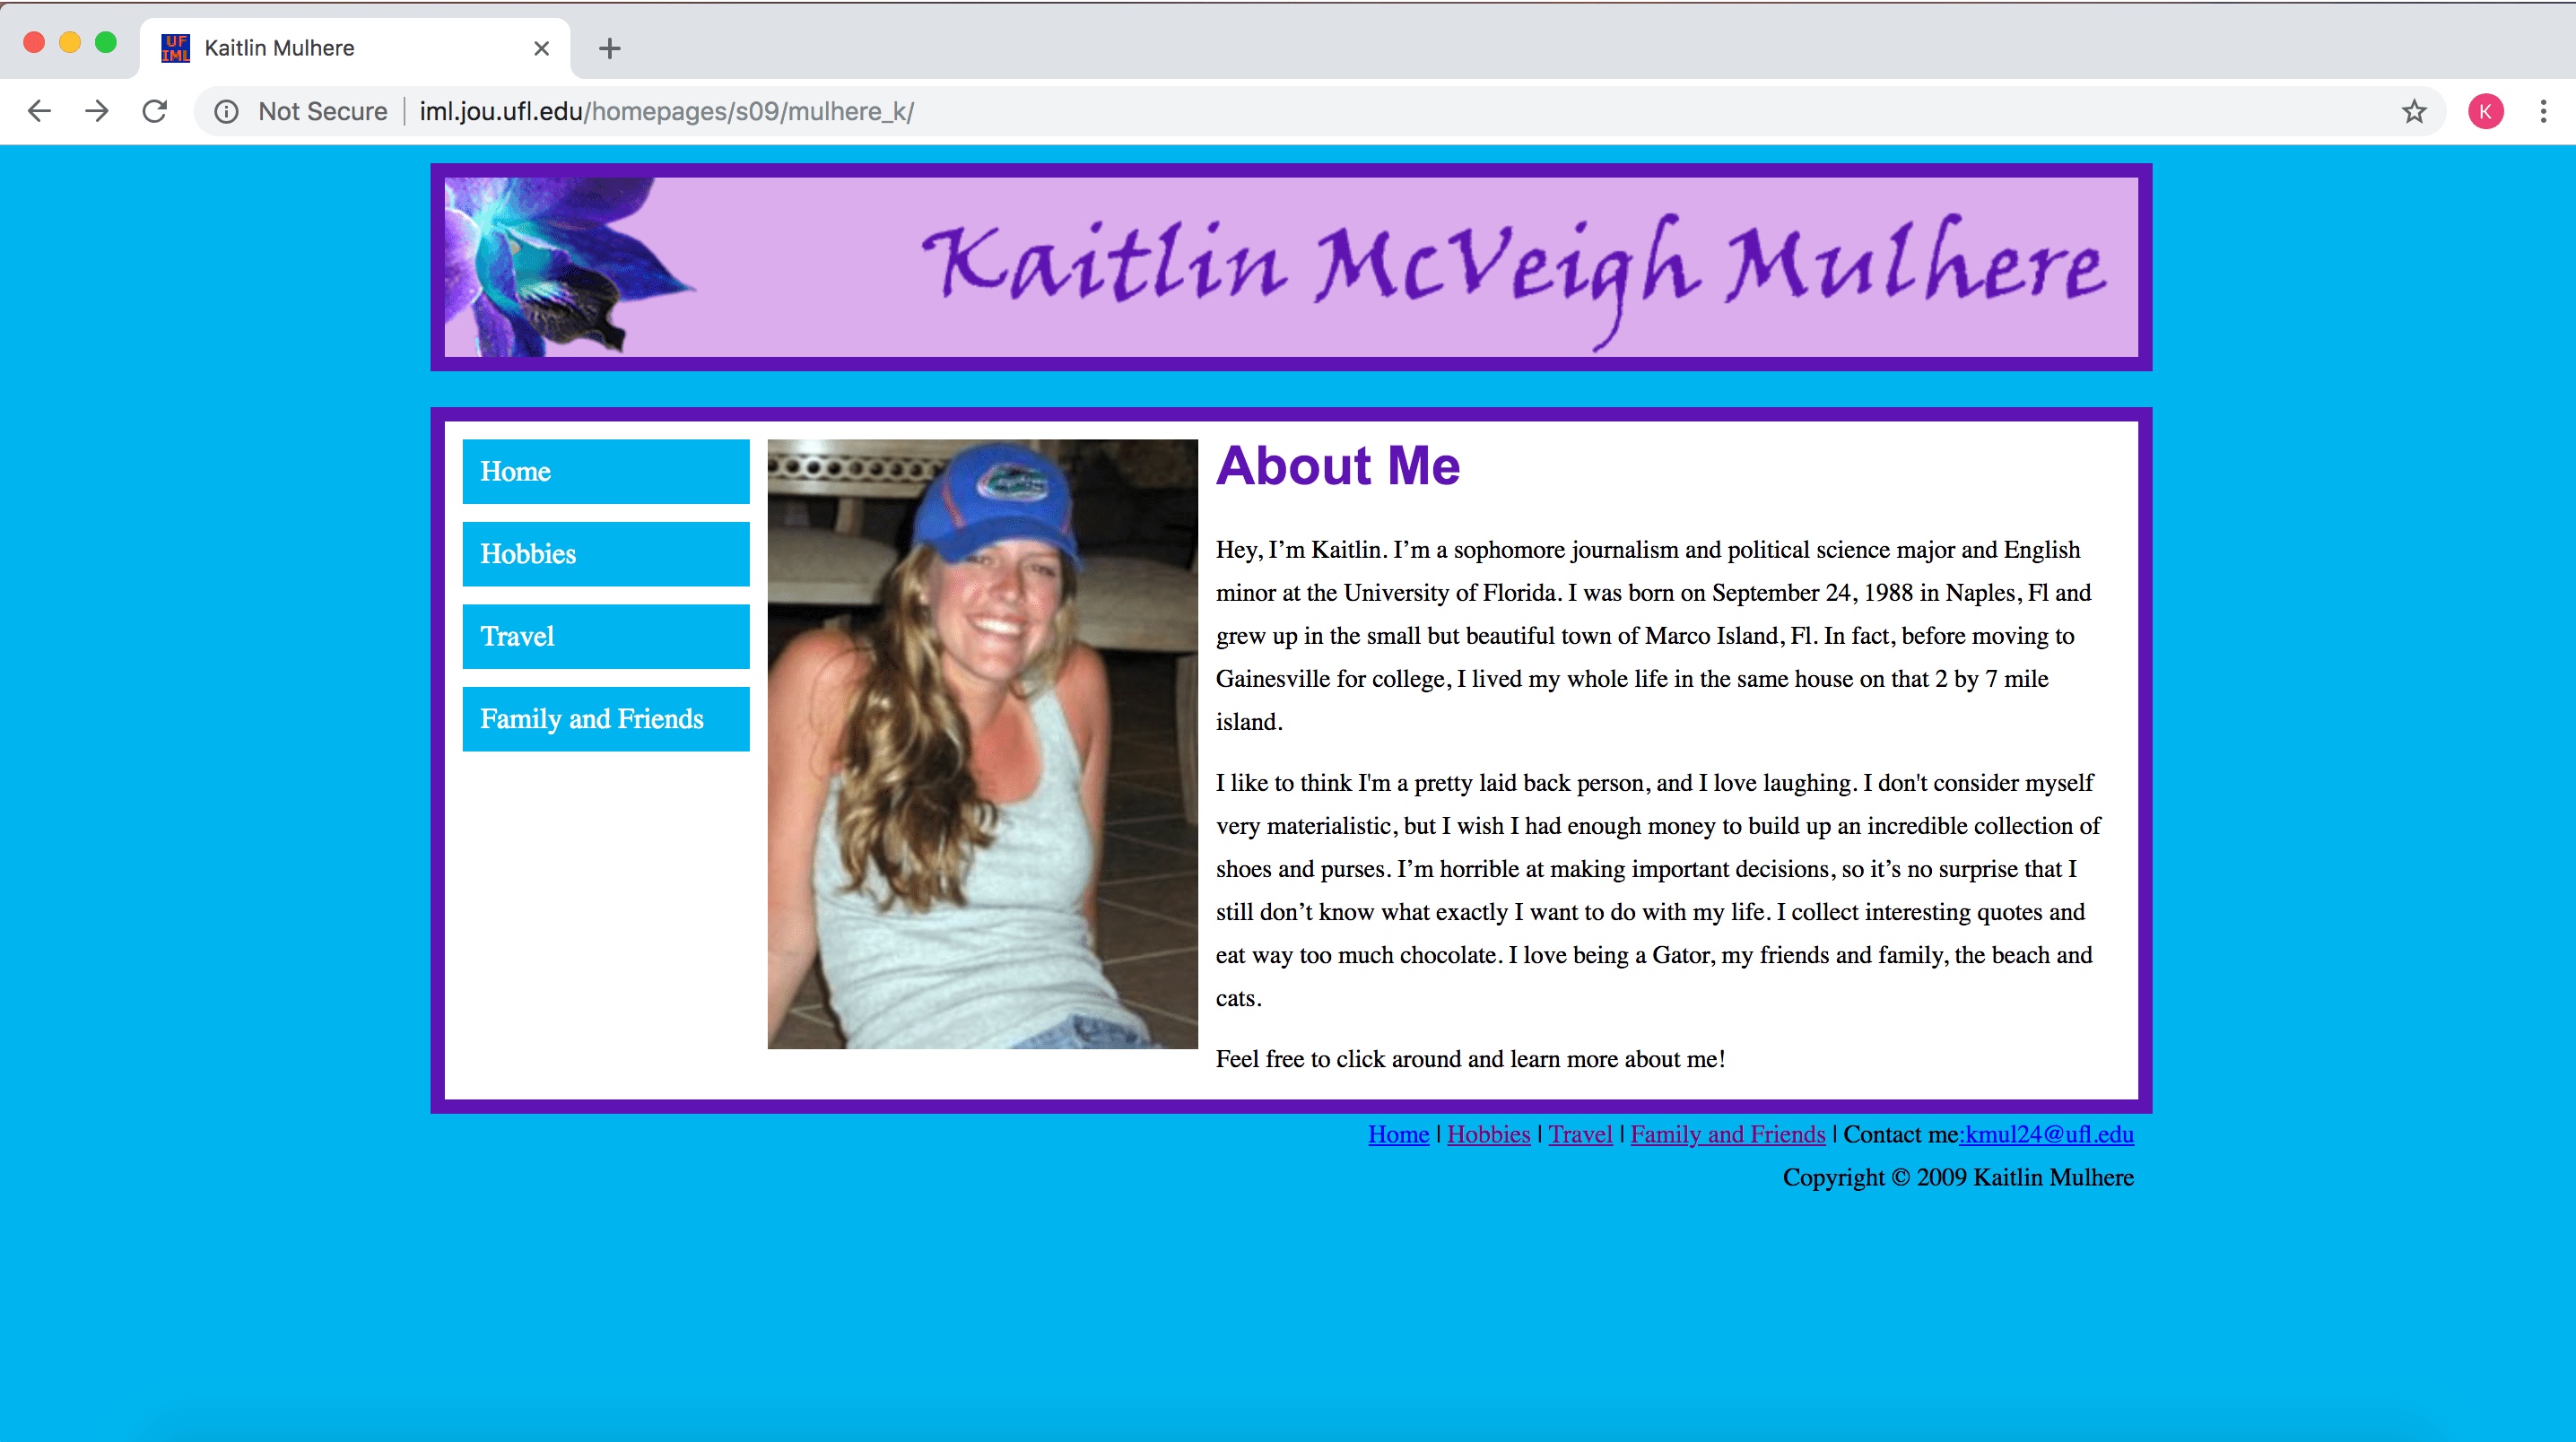 Shield your eyes: This is my personal webpage, built when teal and purple were all the rage.